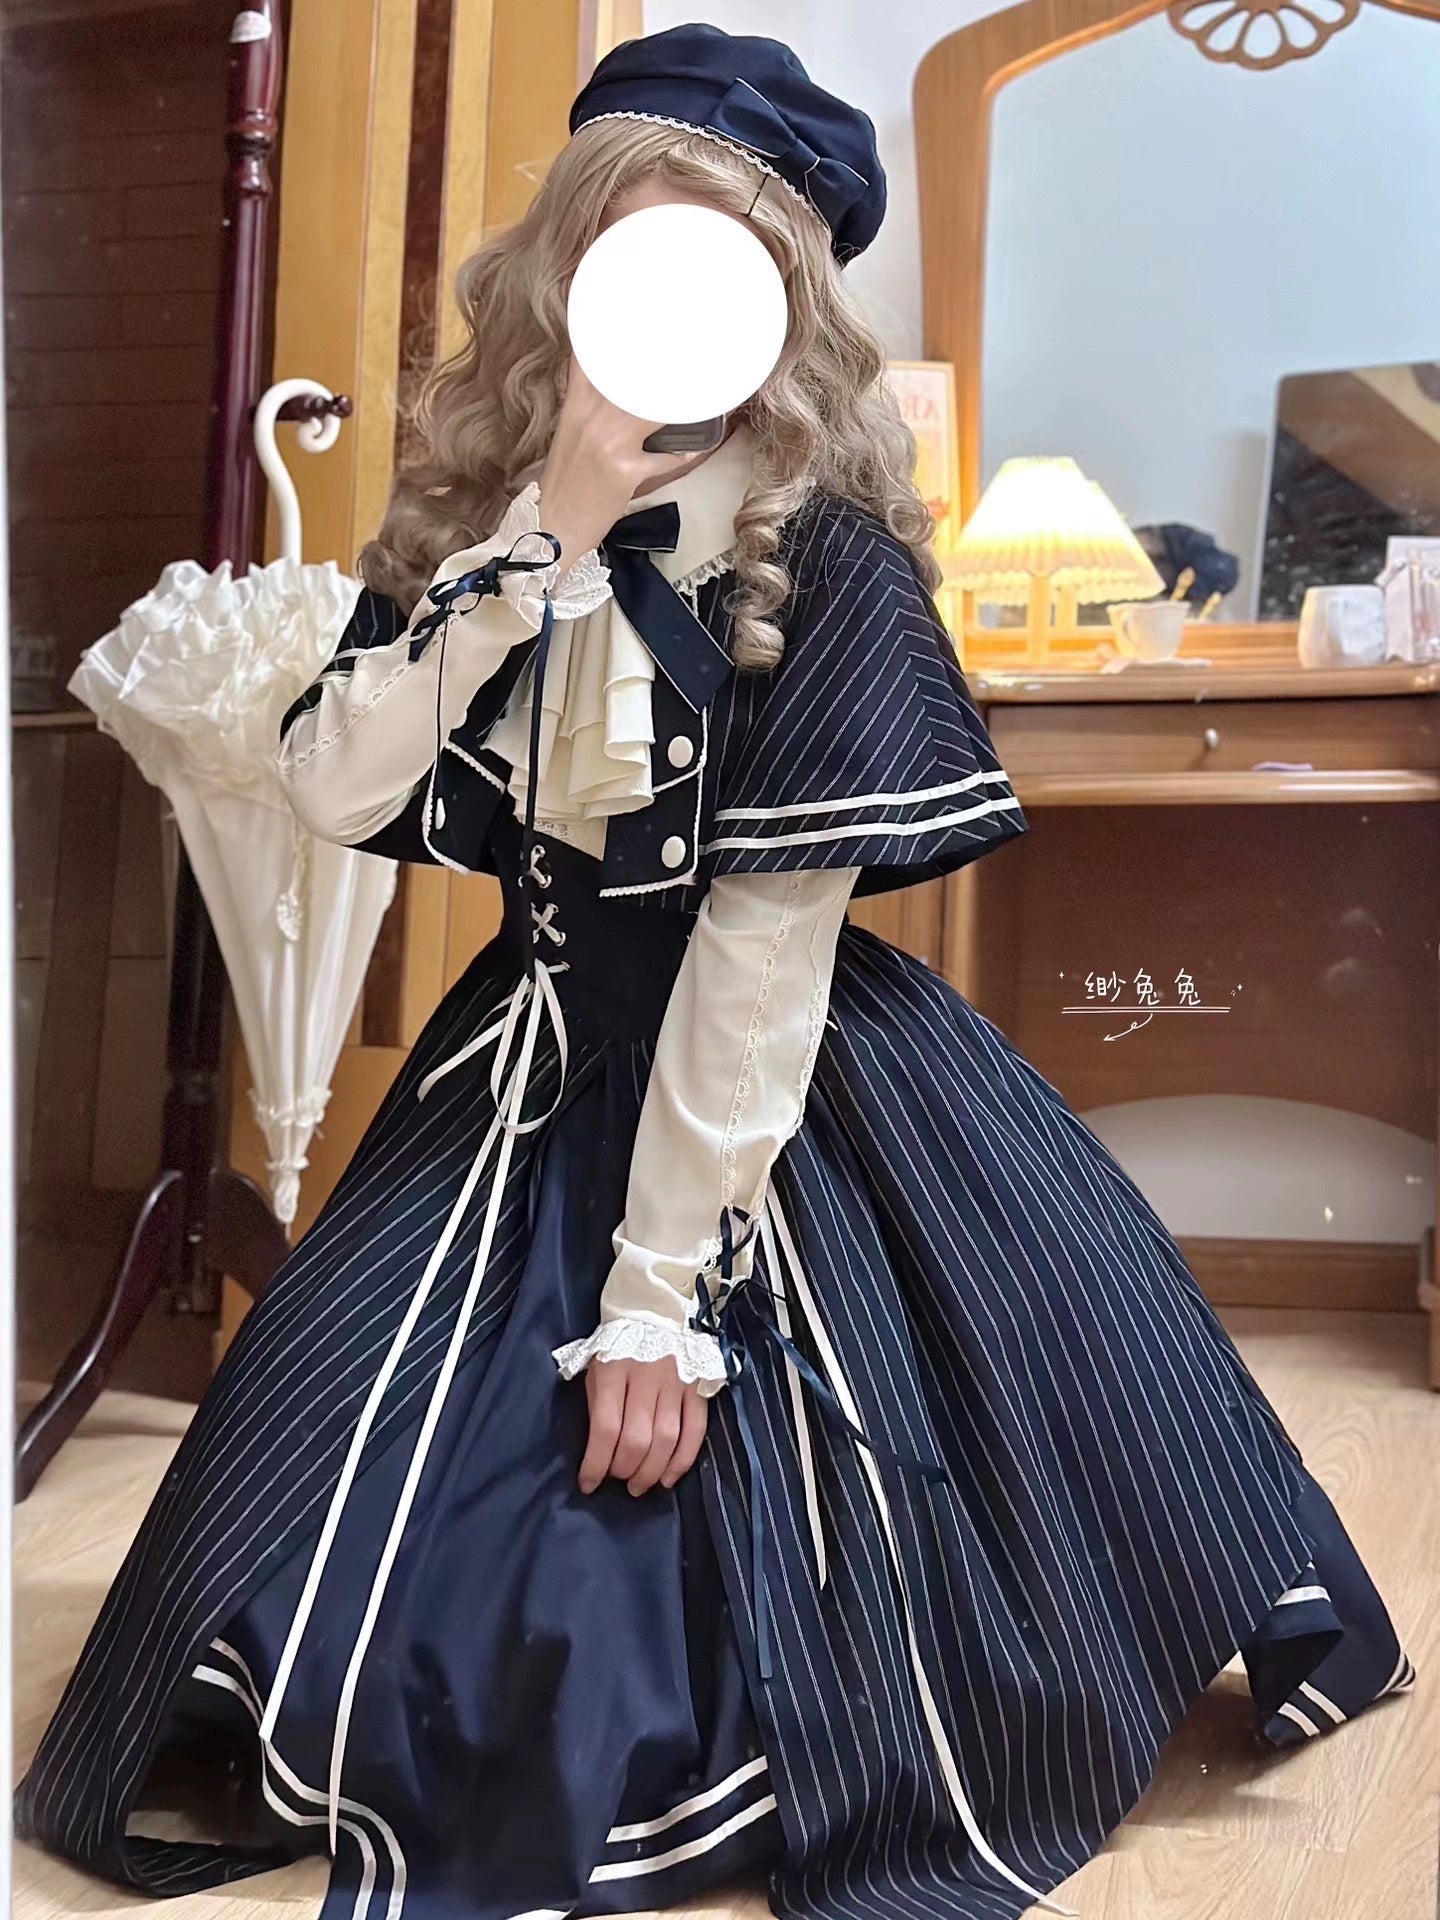 [Sale period ended] Violet Garden navy striped dress, cape, and hat set